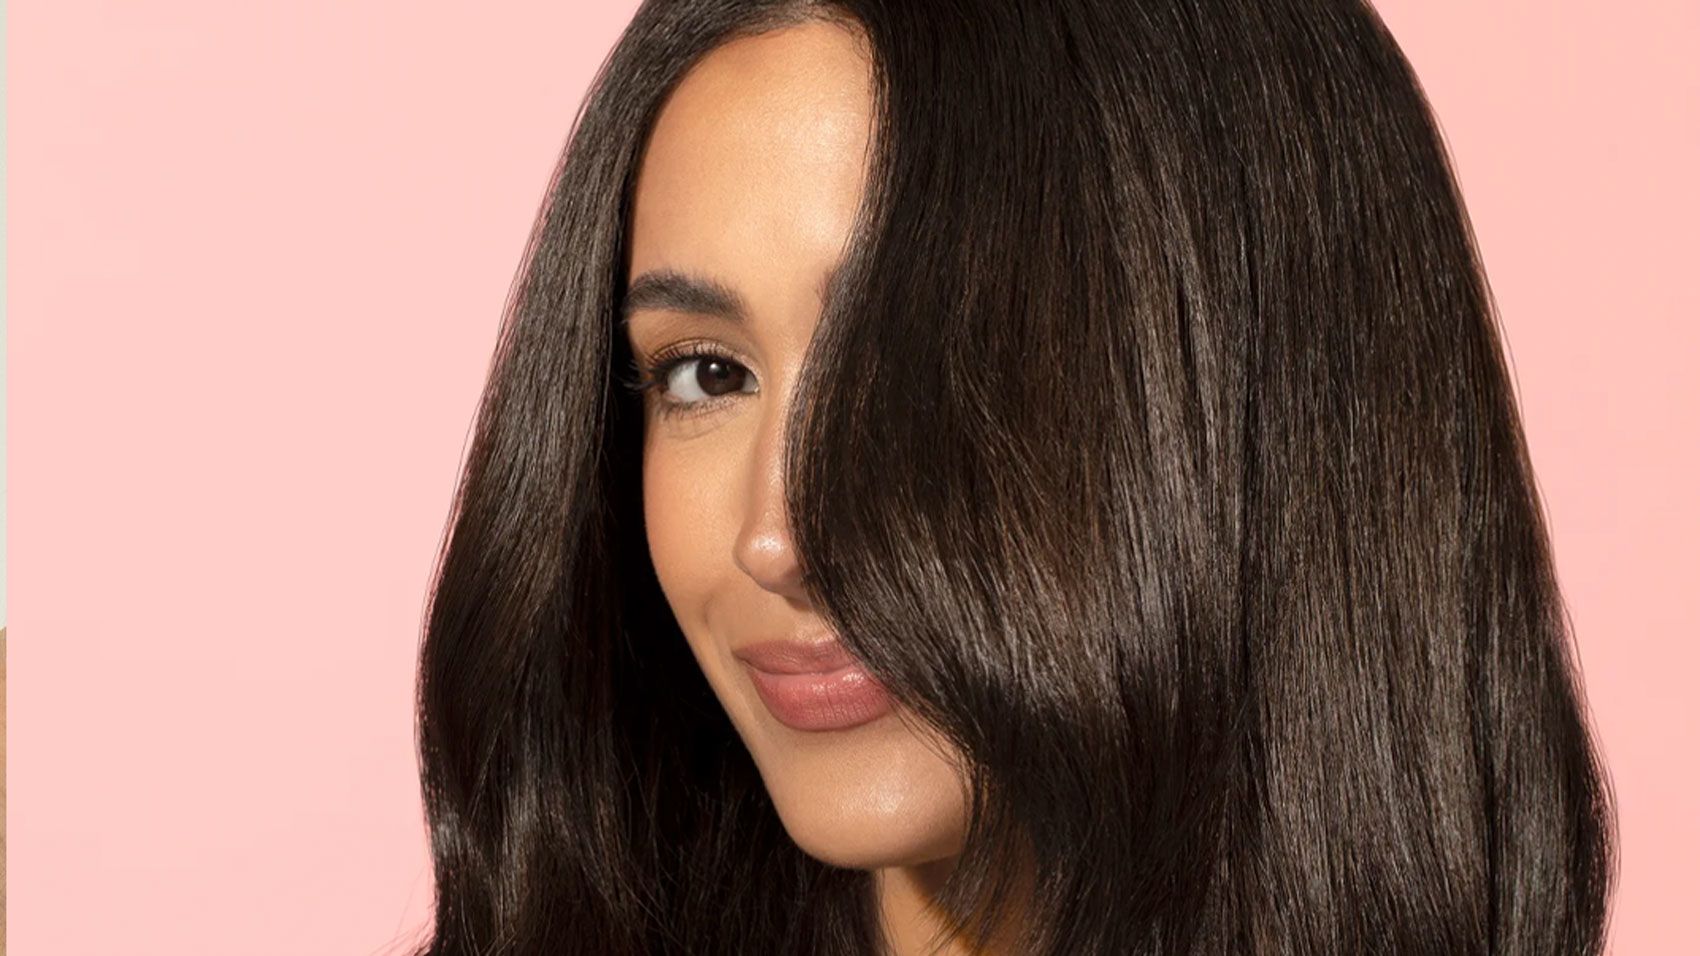 Hair gloss: What it is and how to try it at home